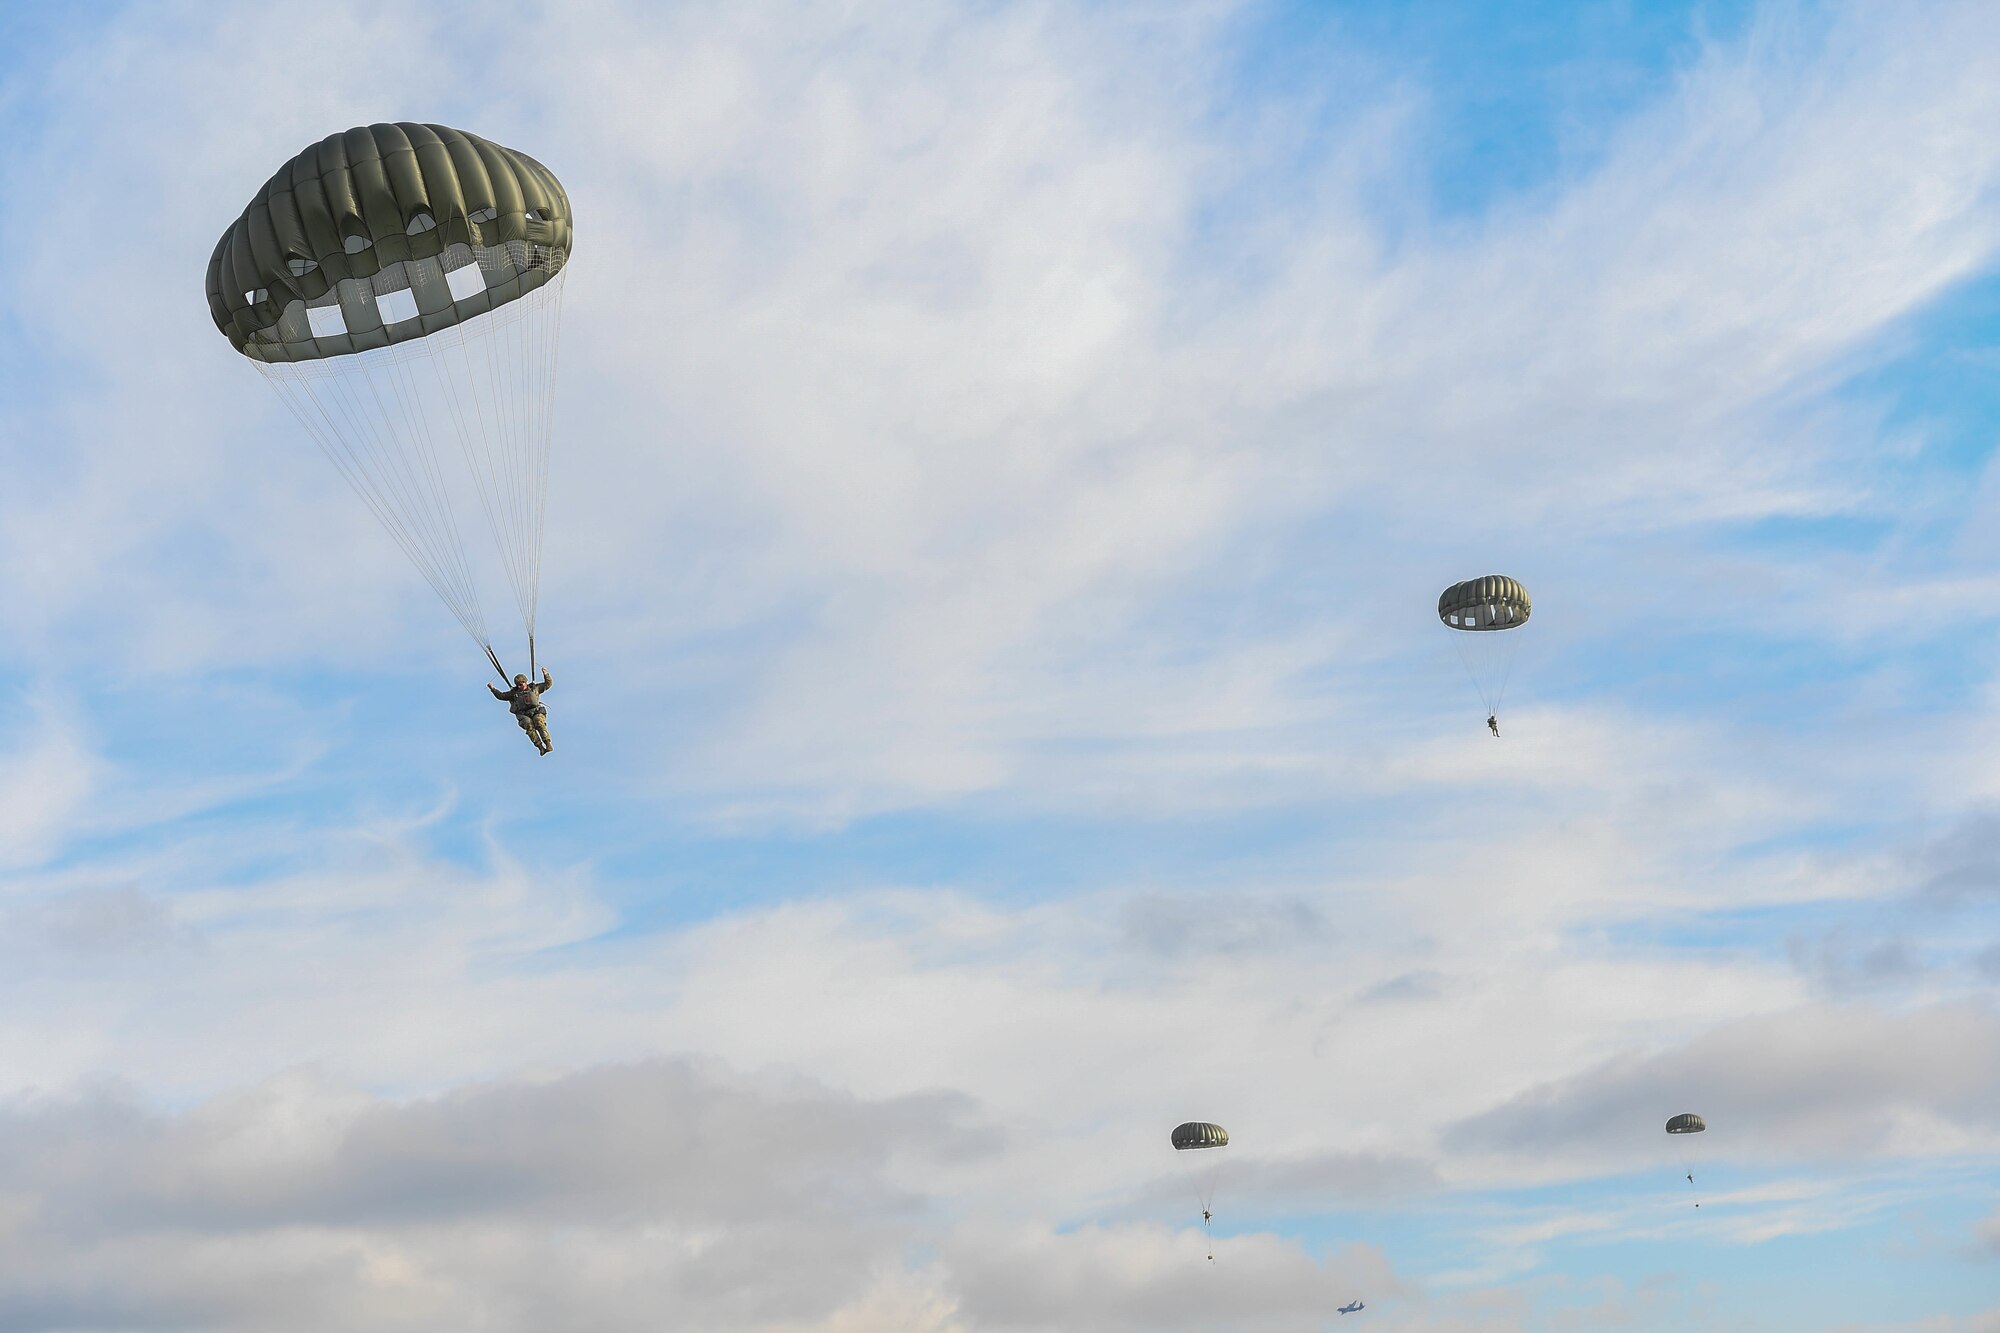 U.S. Army paratroopers from the 173rd Airborne Brigade and 1st Battalion, 10th Special Forces Group descend into Alzey Drop Zone in Ober-Flörsheim, Germany, Jan. 20, 2023.